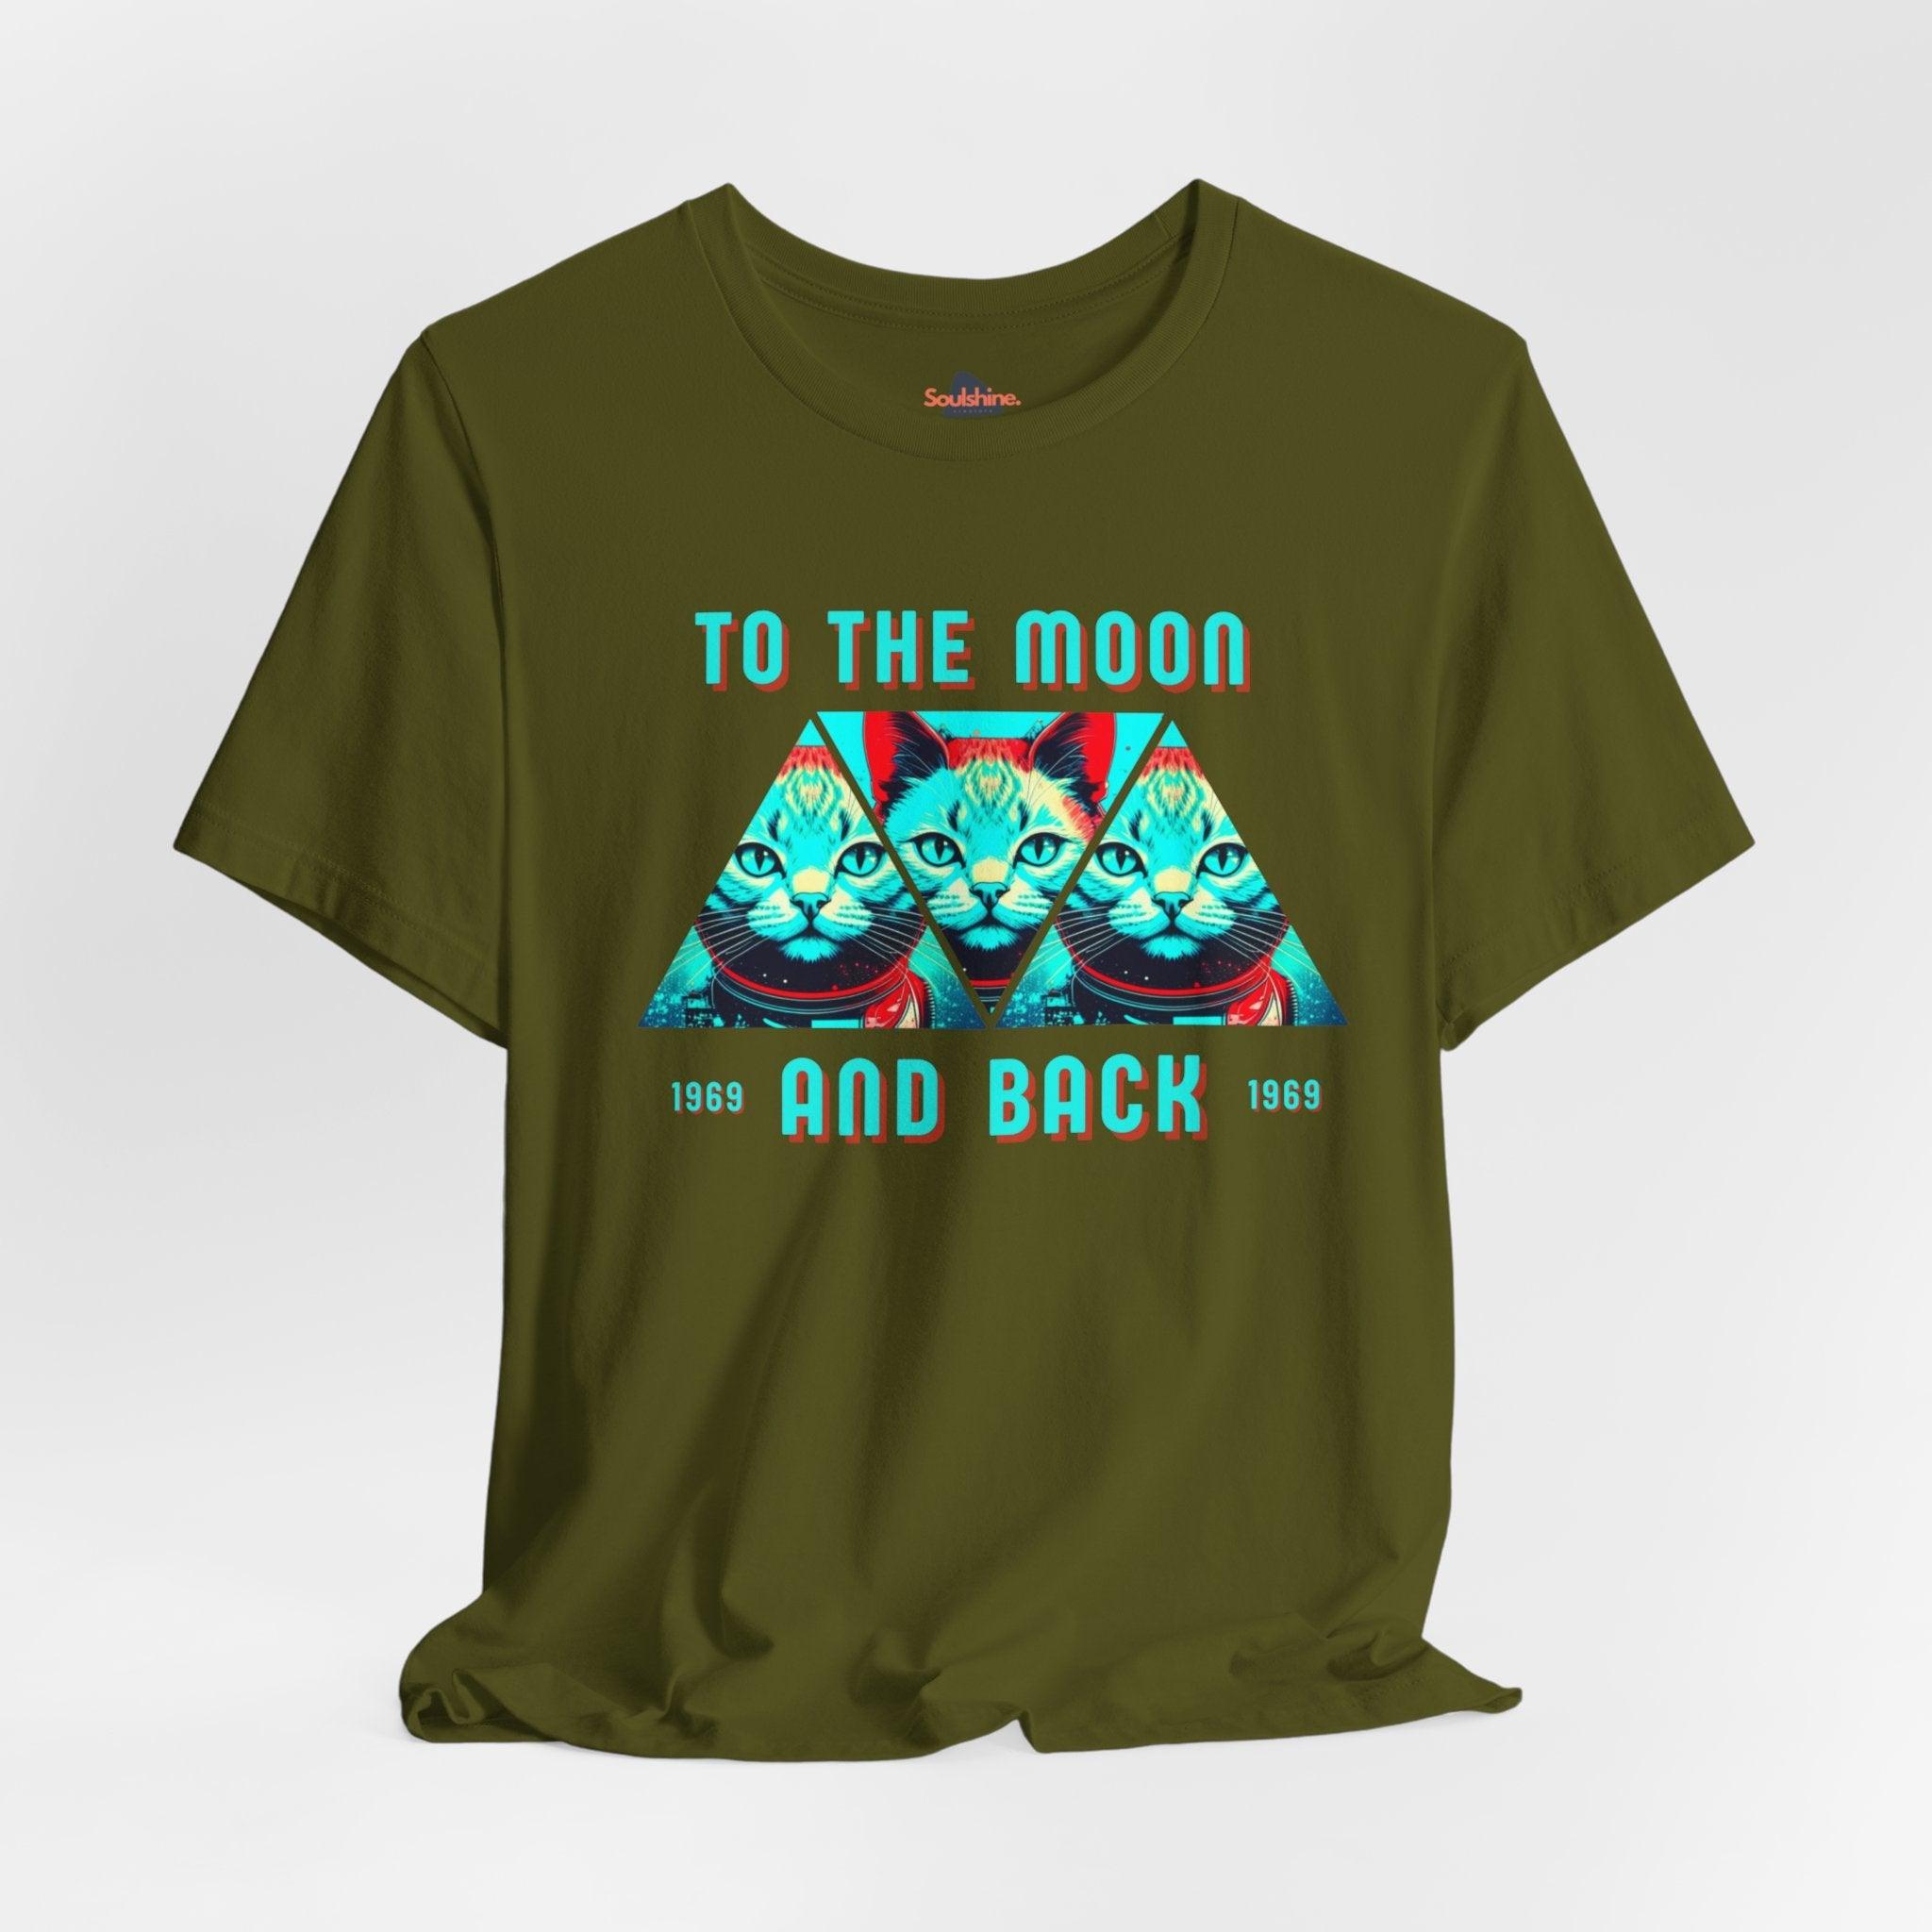 To the moon and back - Soulshinecreators - Unisex Jersey Short Sleeve Tee - US Olive S T-Shirt by Soulshinecreators | Soulshinecreators